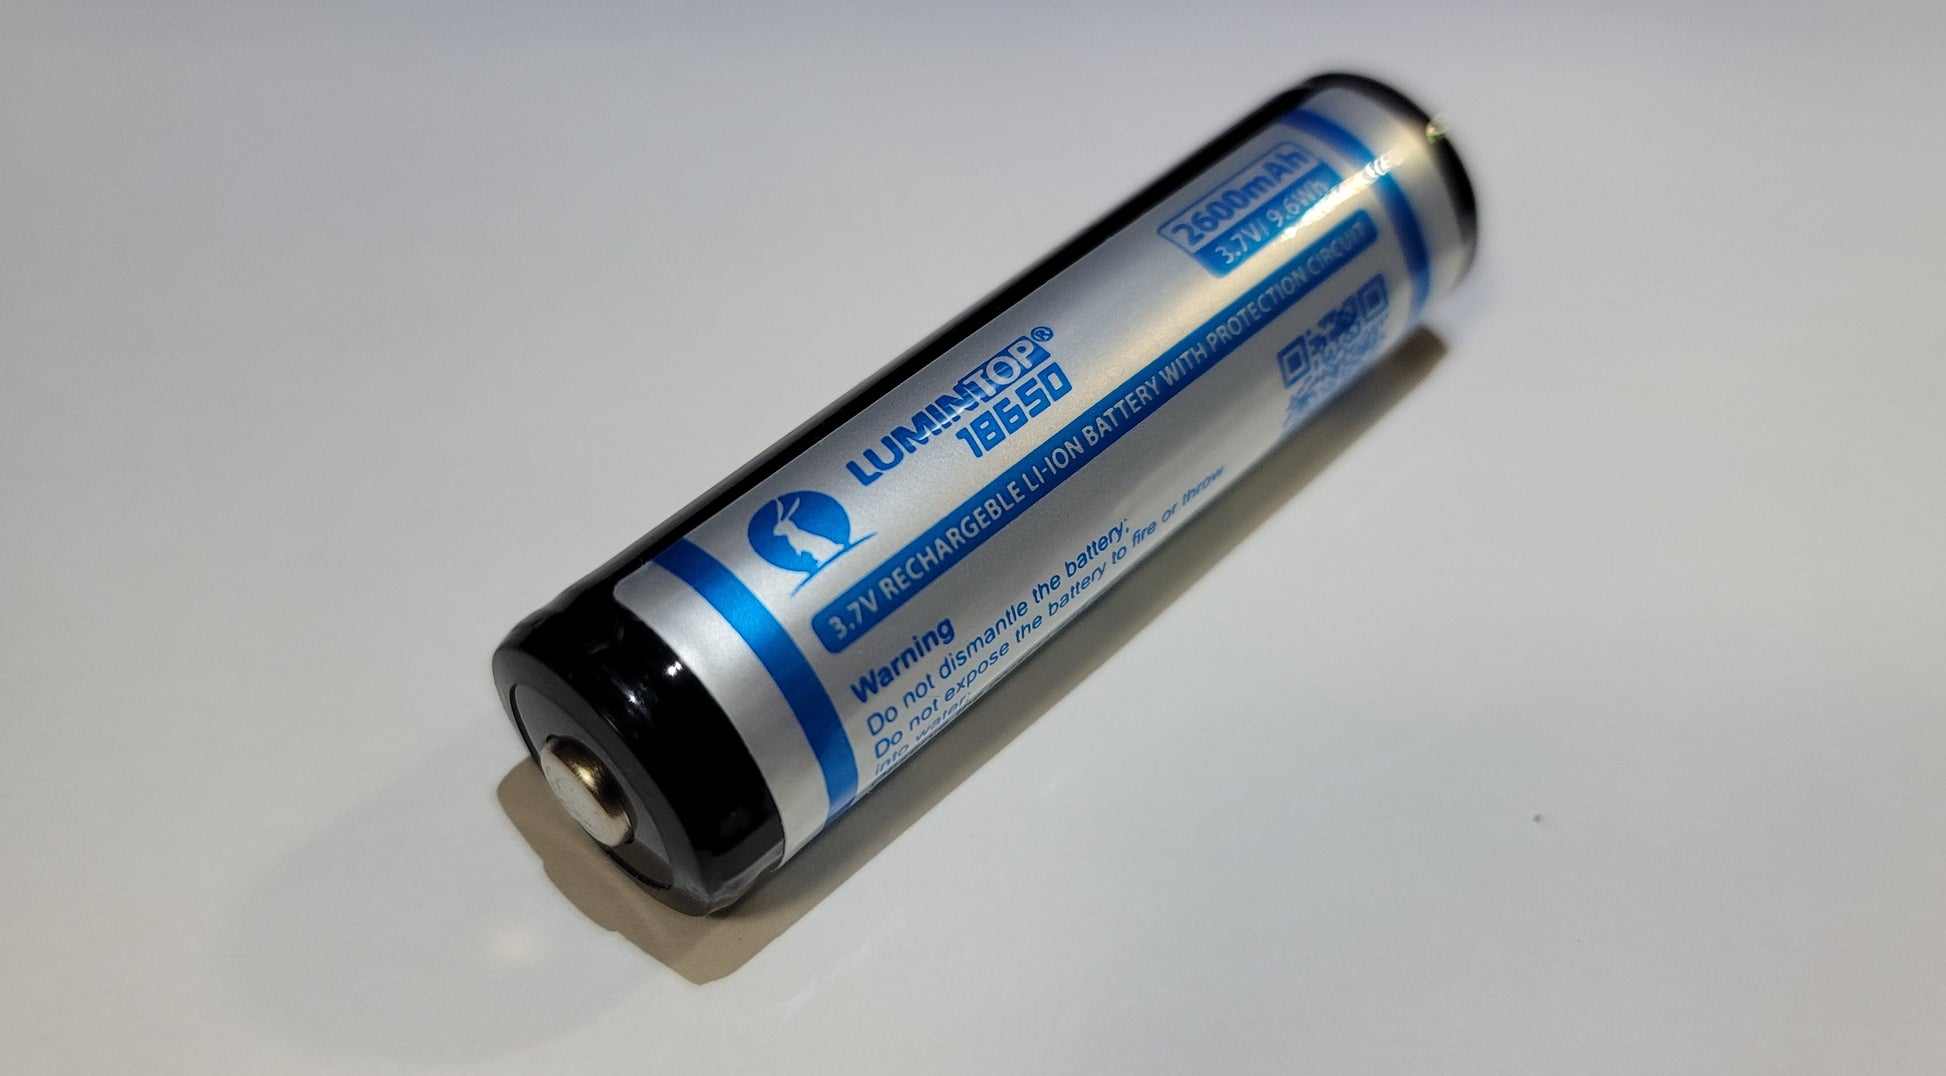 Lumintop 18650 2600mAh Rechargeable Li-ion Battery **** HAS TO BE SHIPPED WITH FLASLIGHT + FEDEX ***